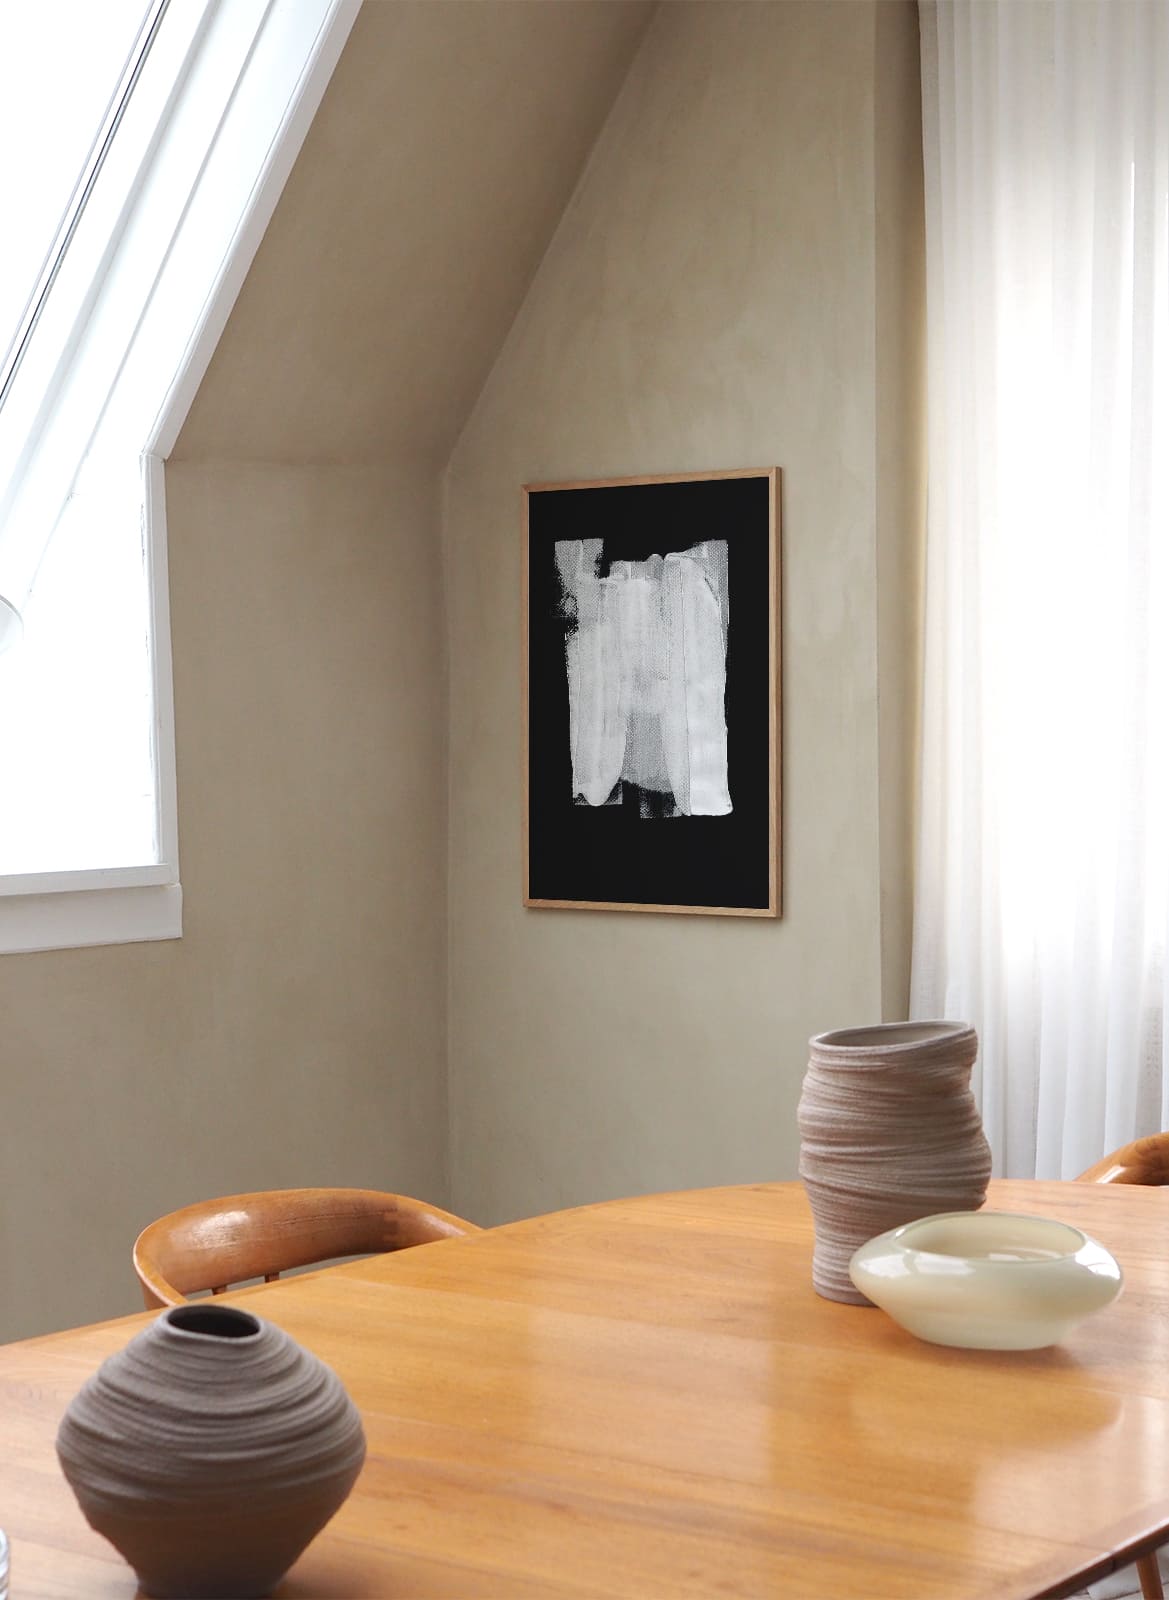 Framed black and white poster hanging in a living room by Atelier Cph